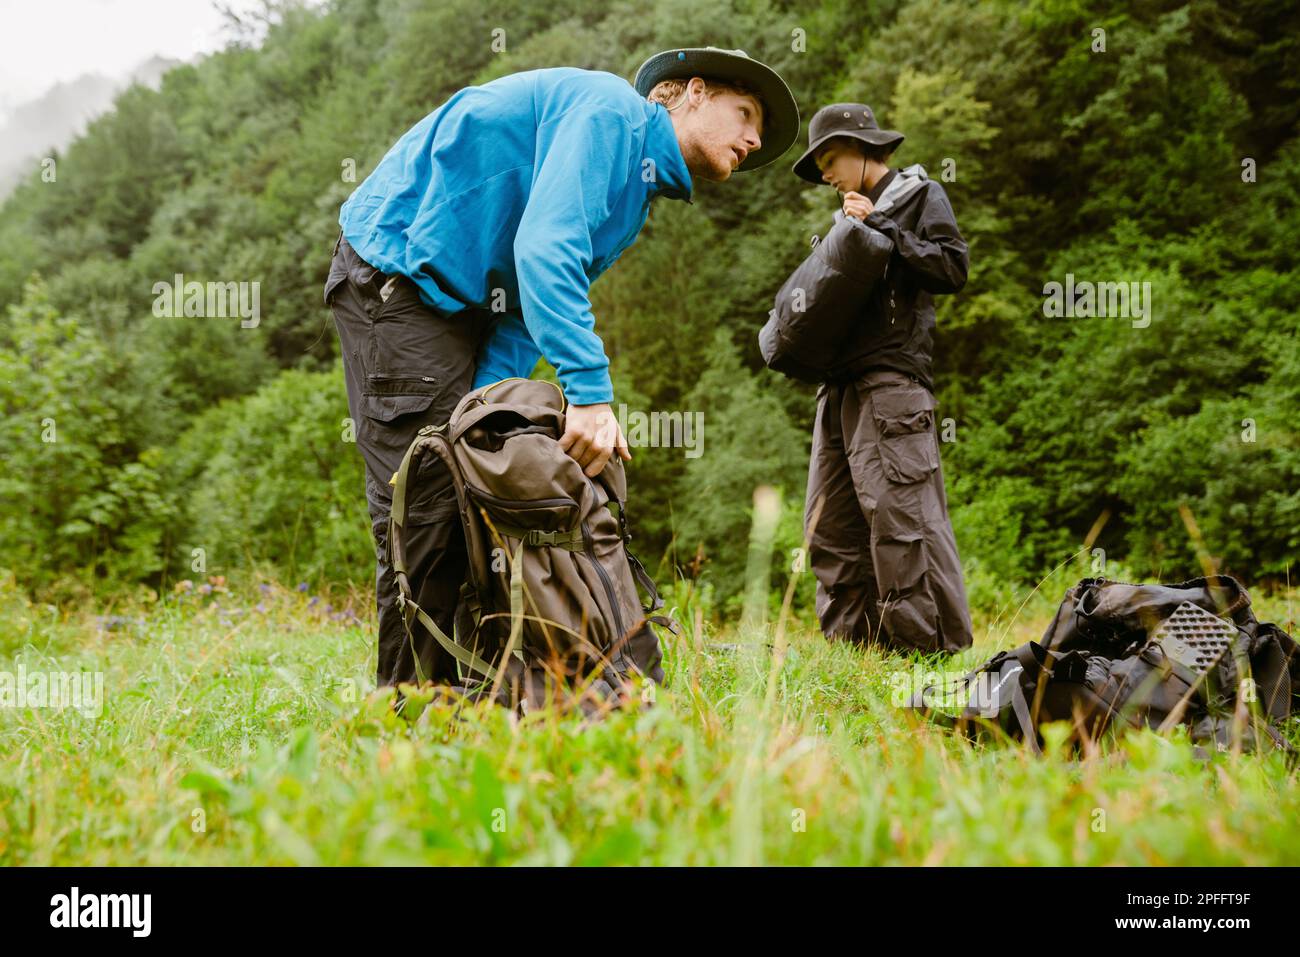 Young white people wearing trekking equipment using backpacks while hiking in mountain forest Stock Photo